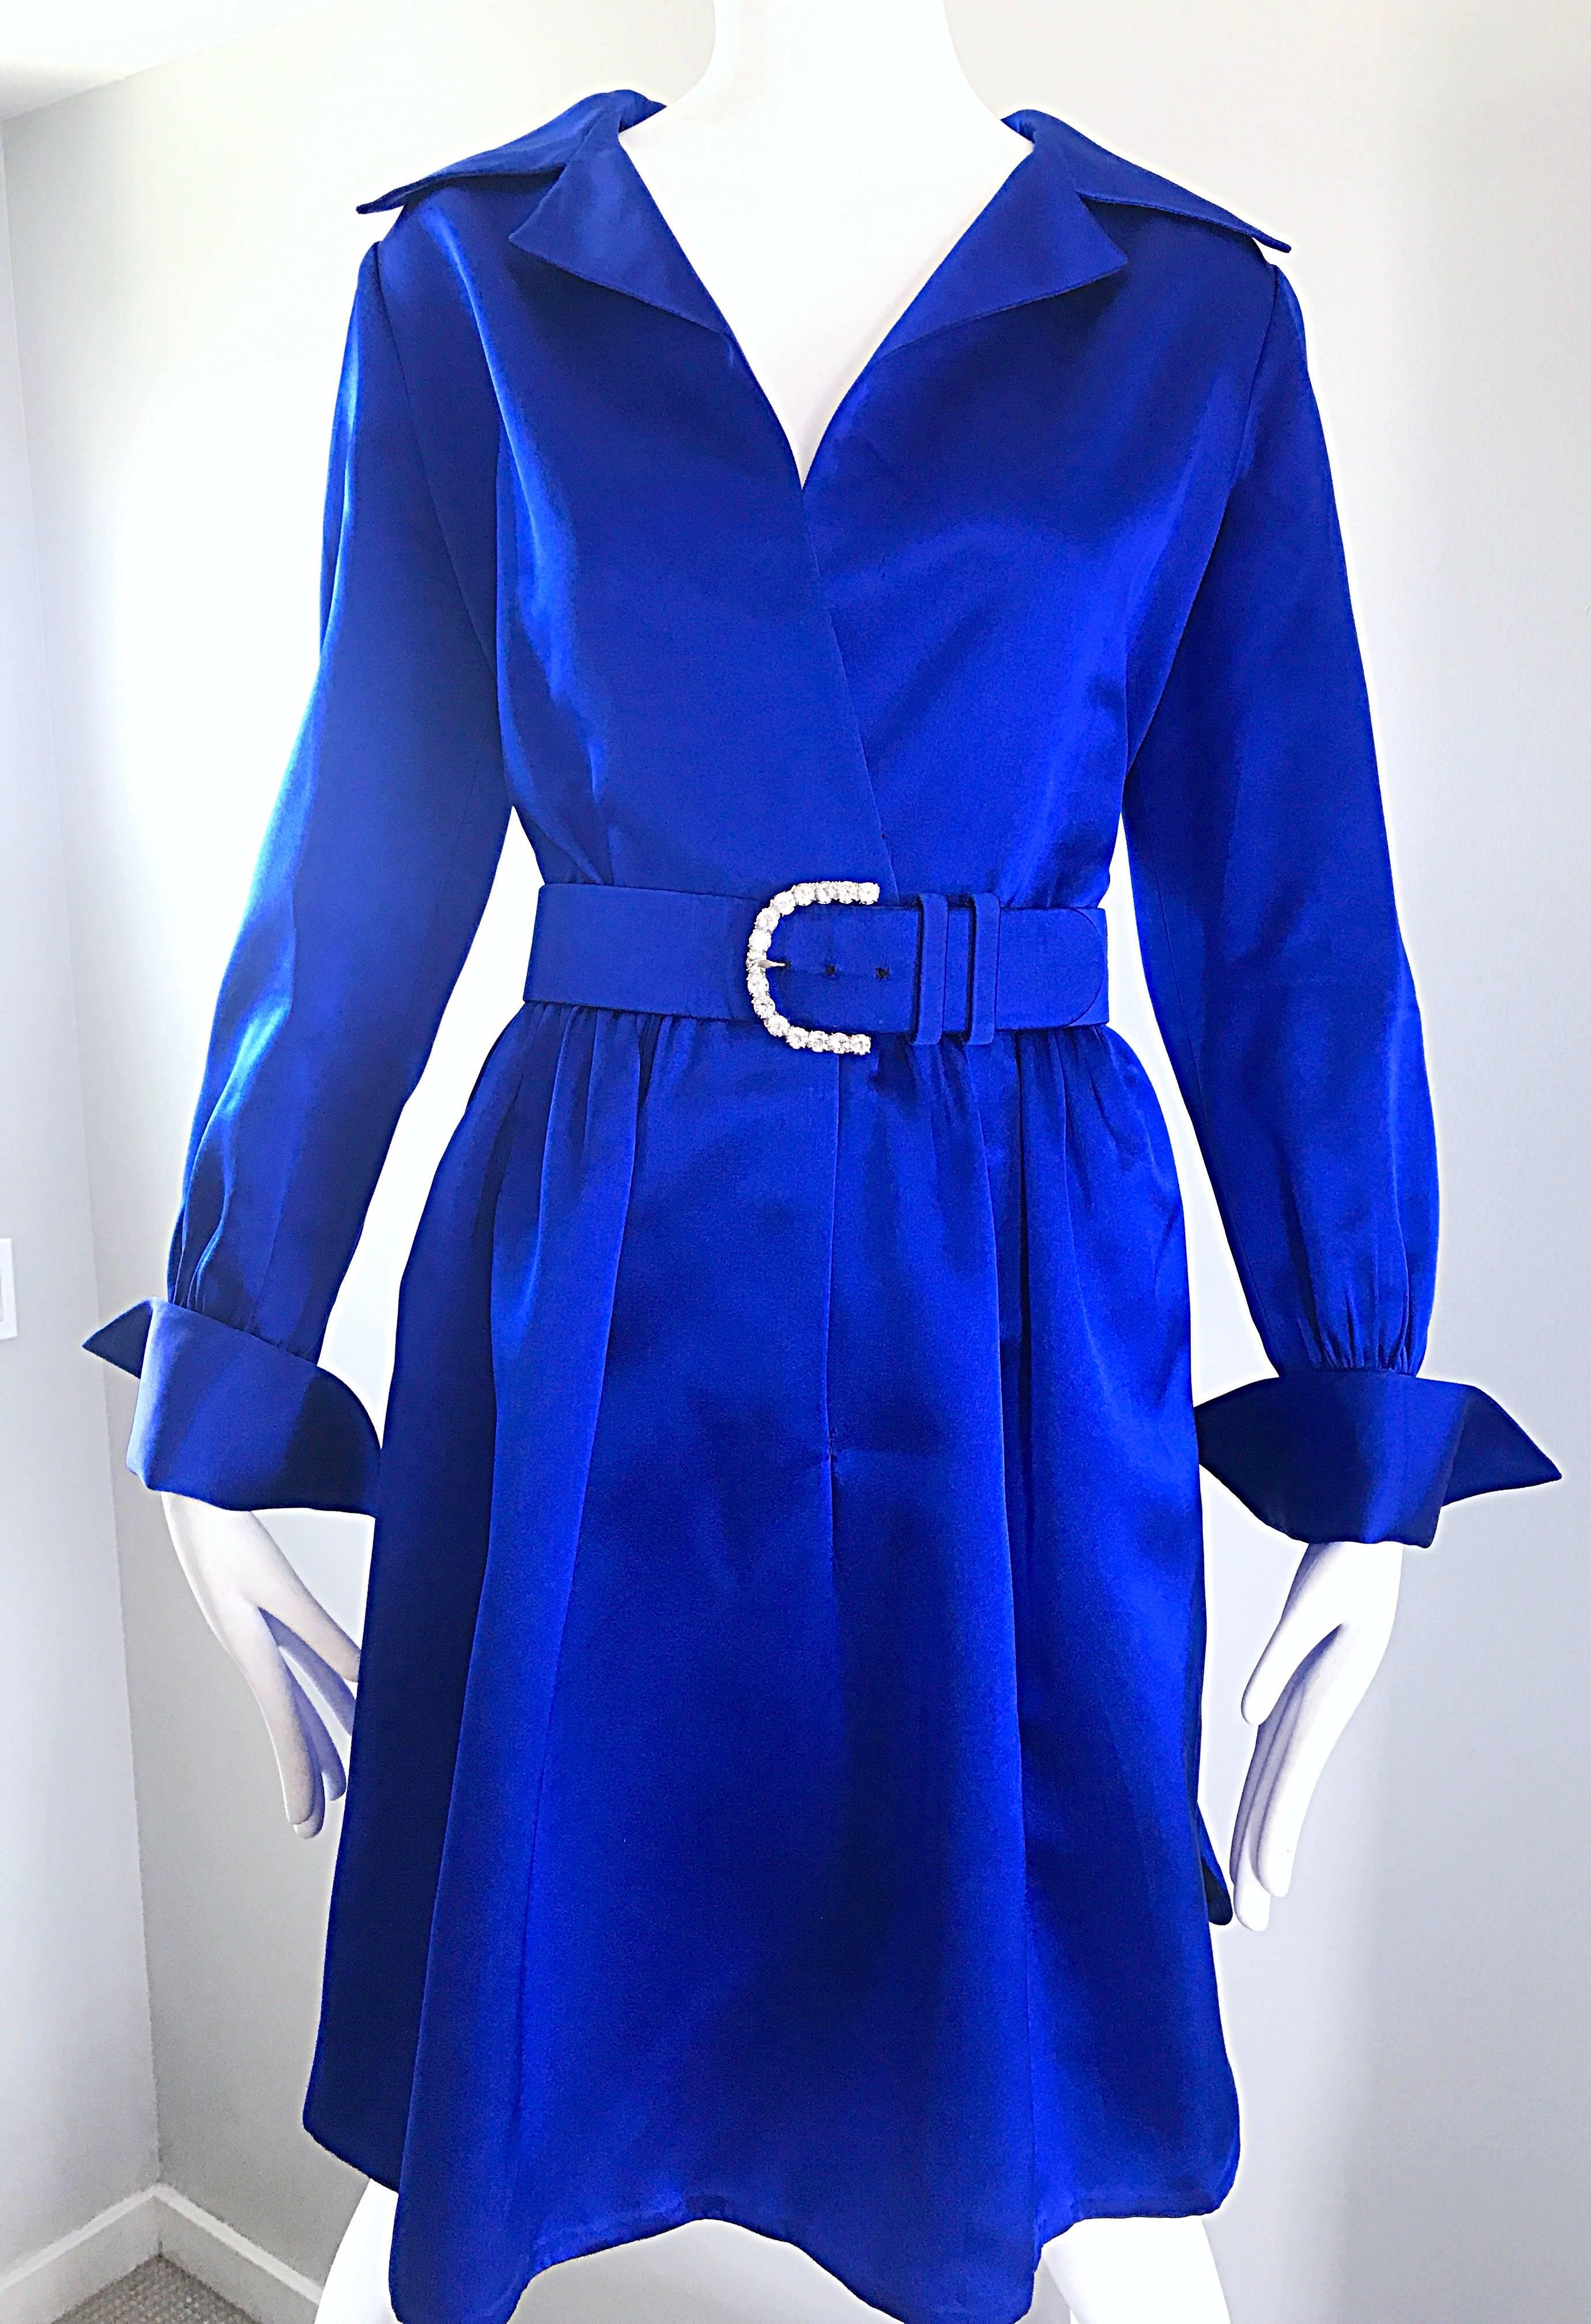 Gorgeous Bill Blass Couture Vintage 1970s Royal Blue Silk Satin Belted 70s Dress In Excellent Condition For Sale In San Diego, CA